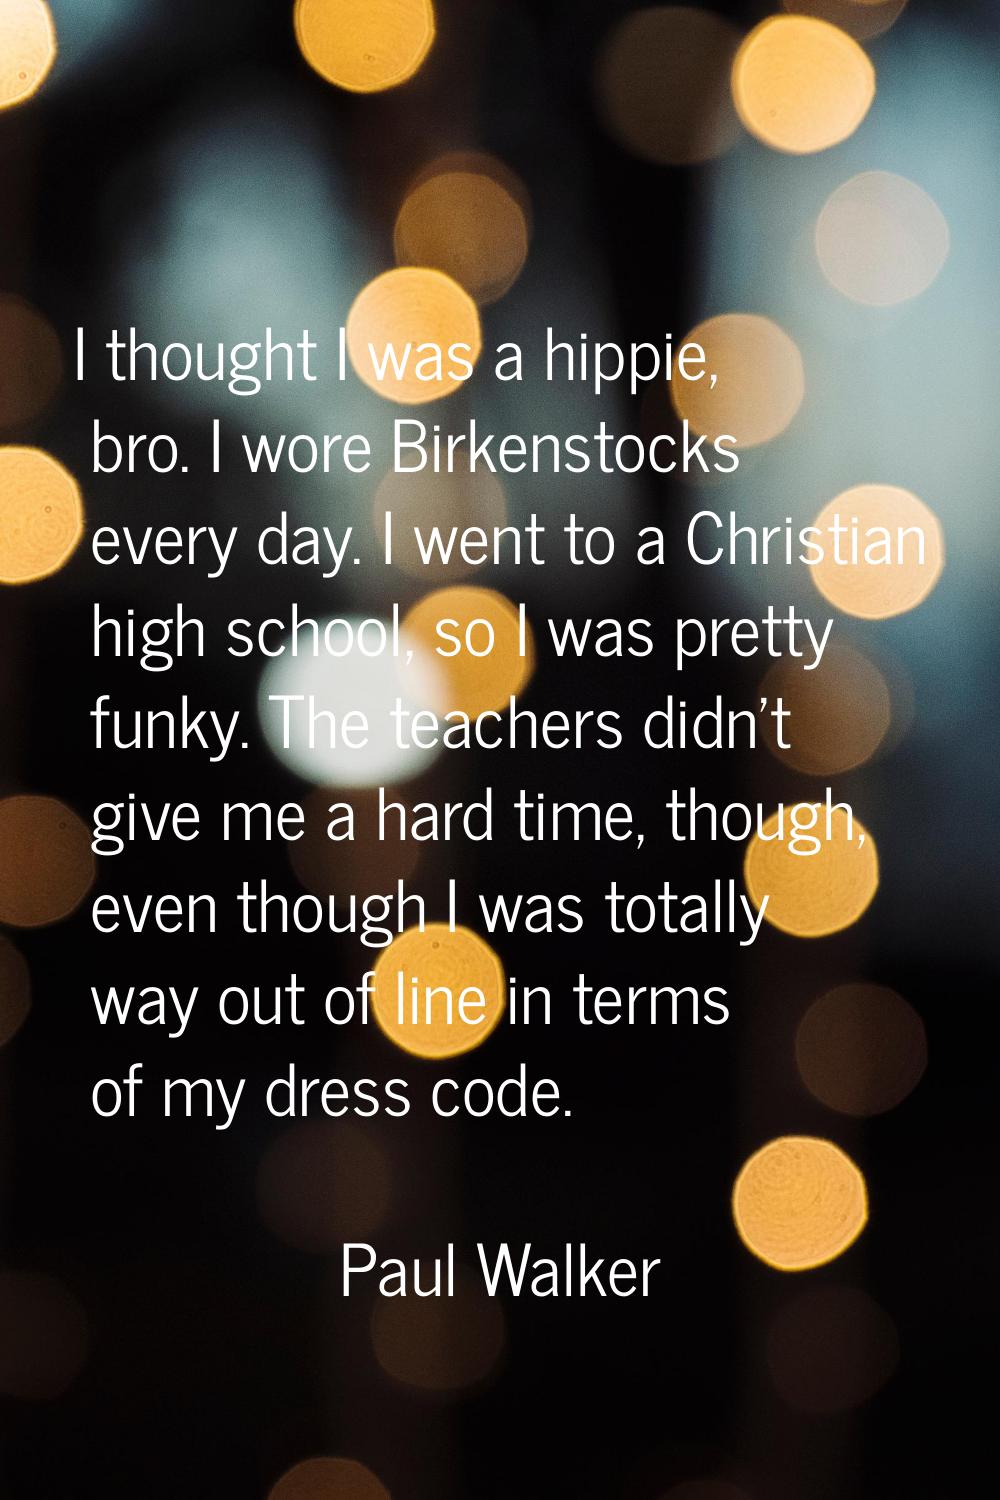 I thought I was a hippie, bro. I wore Birkenstocks every day. I went to a Christian high school, so